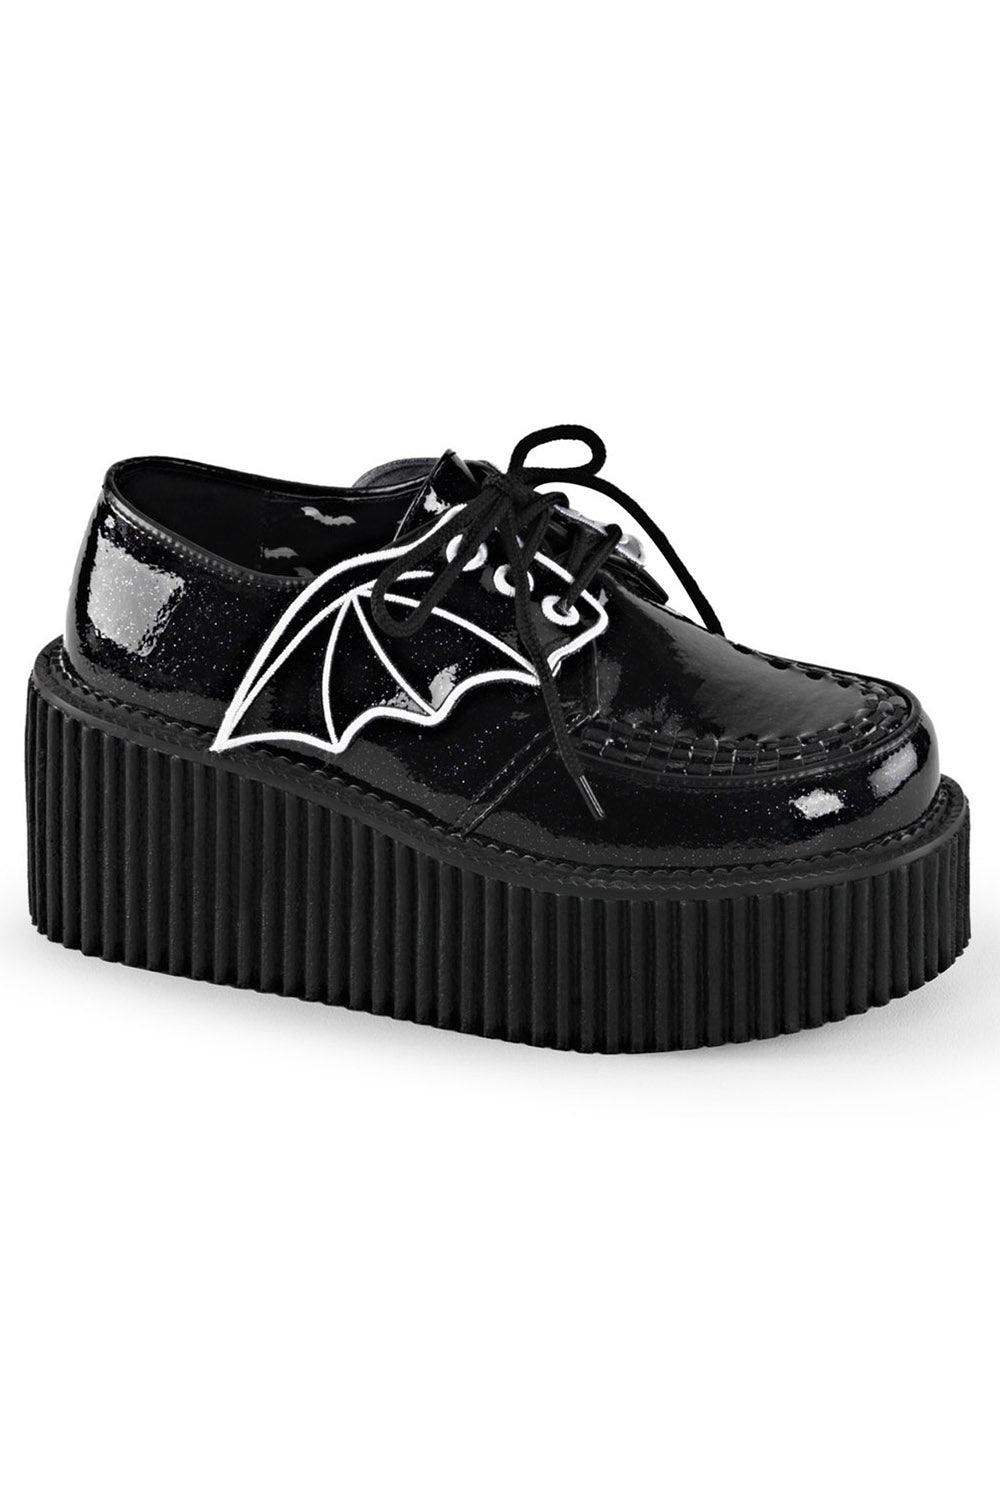 Demonia Shoes Online Store, Next Day Shipping